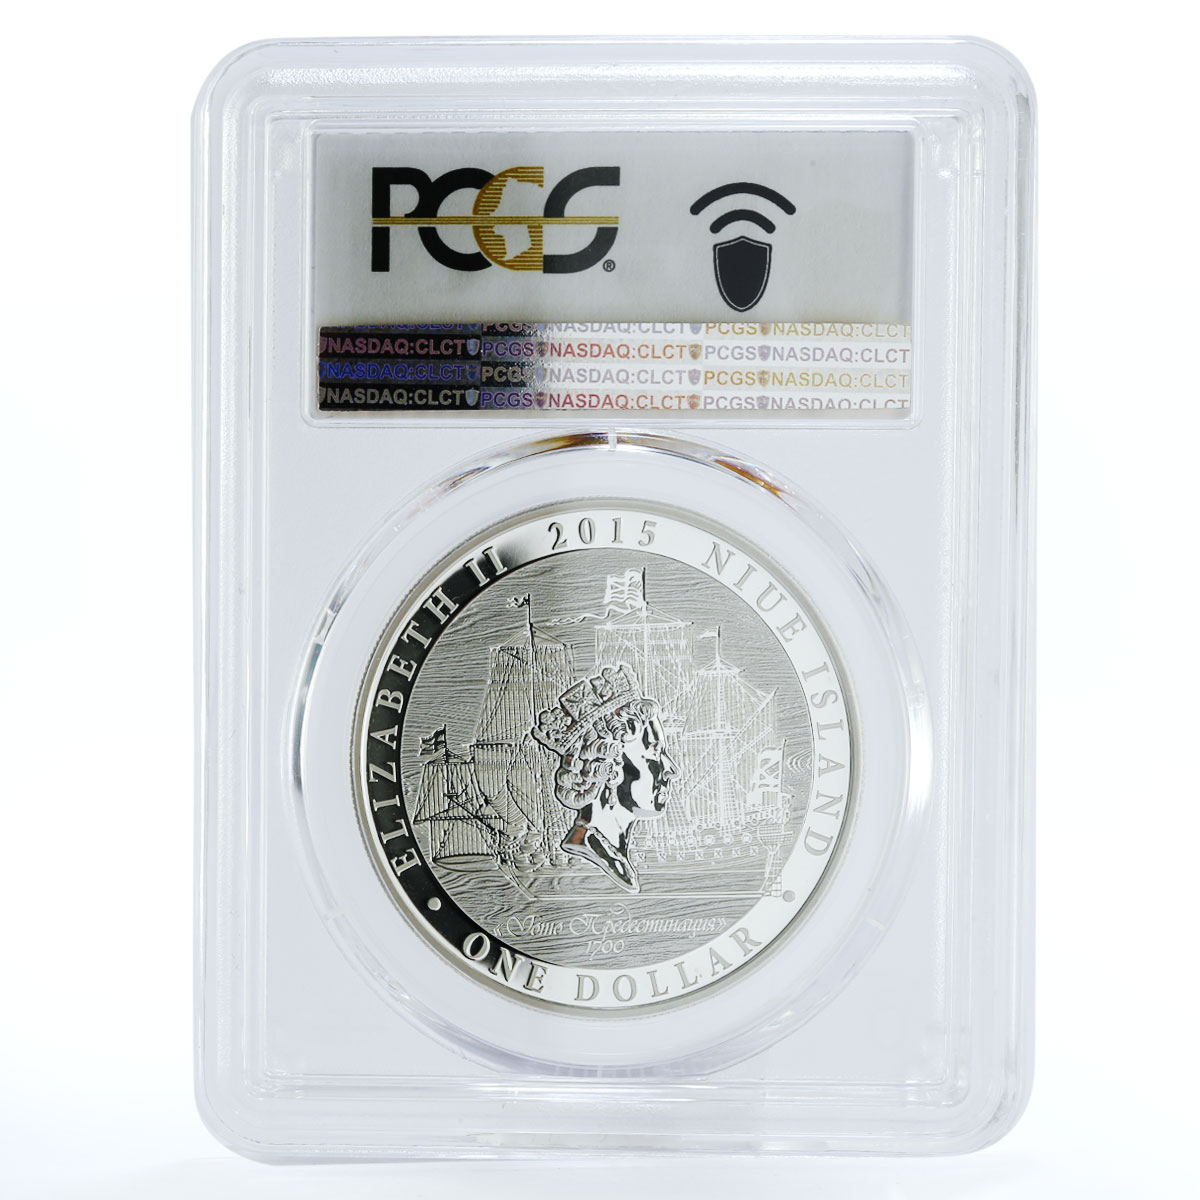 Niue 1 dollar Russian Tsars series Peter I and Ships PR70 PCGS silver coin 2015